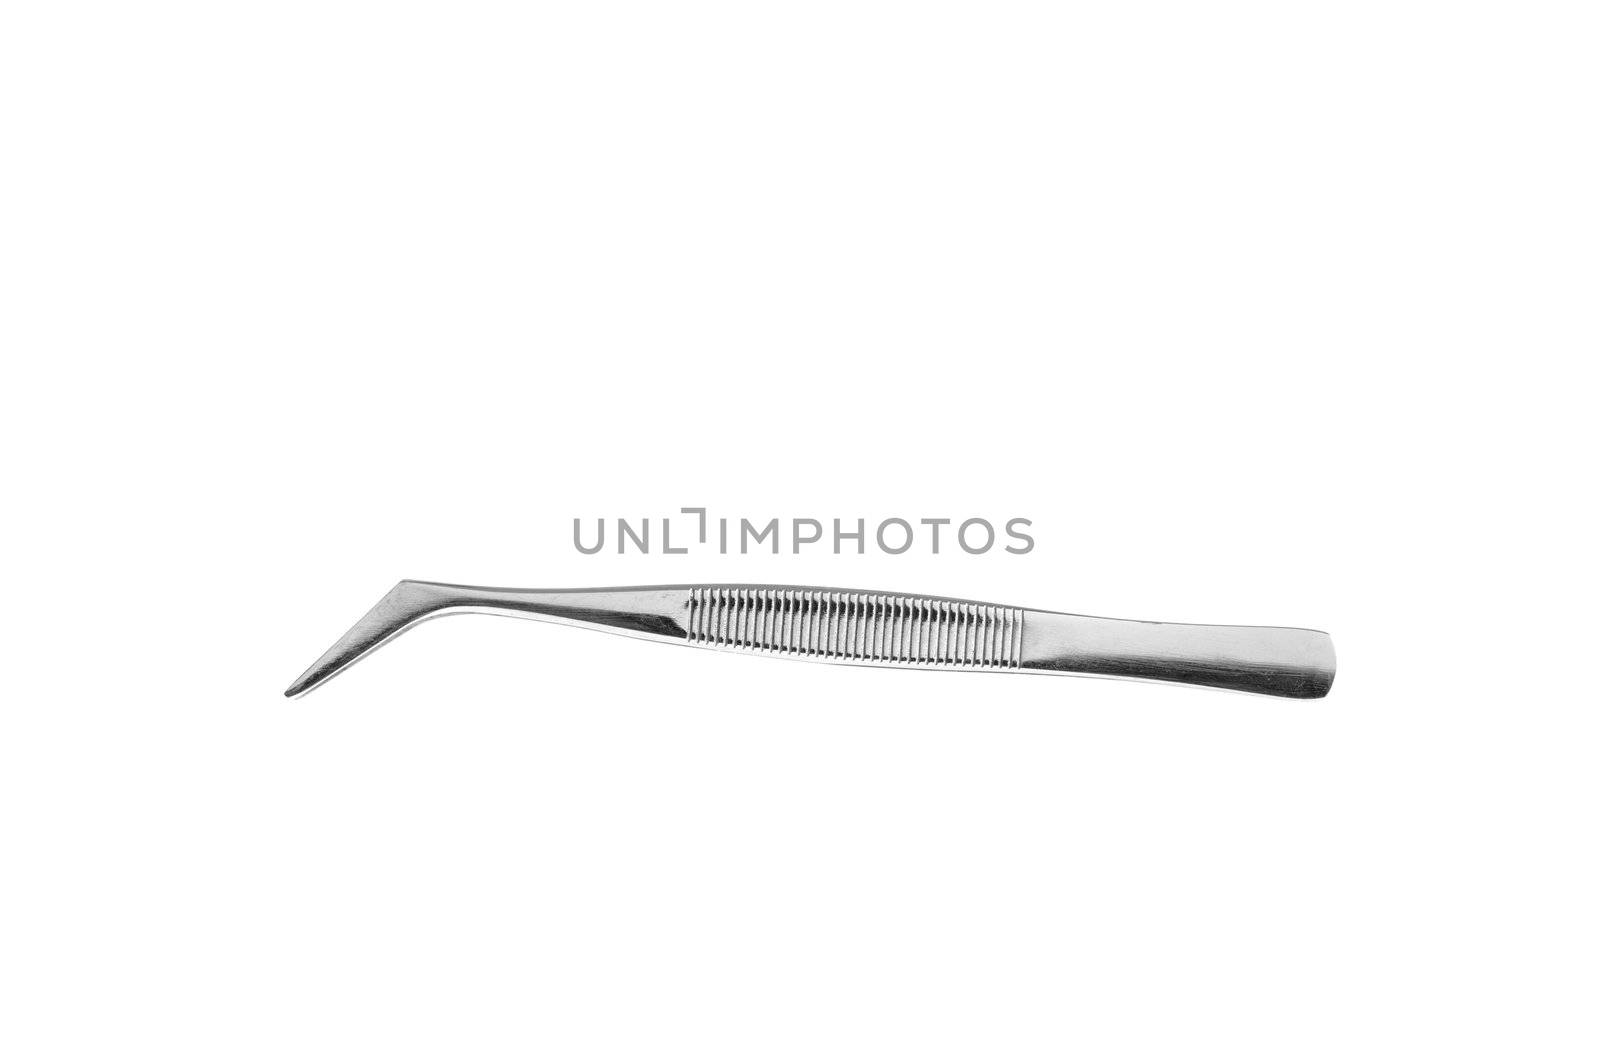 Technical tweezers with pointed tip, isolated on white